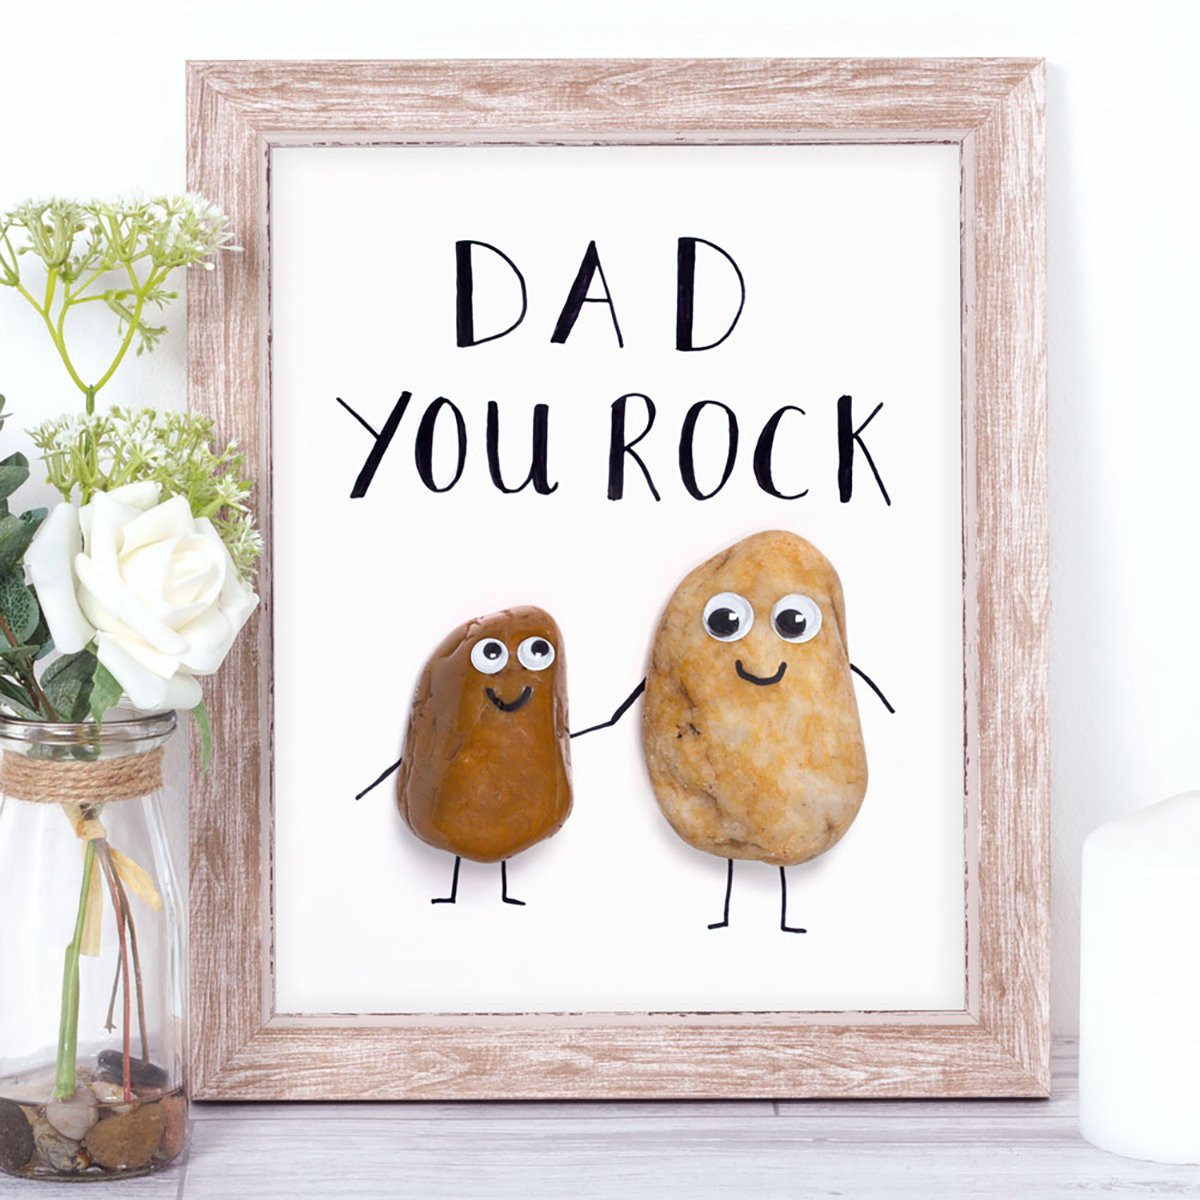 Fathers Day Gift Ideas Crafts
 8 Father’s Day Crafts Kids Can Help Make